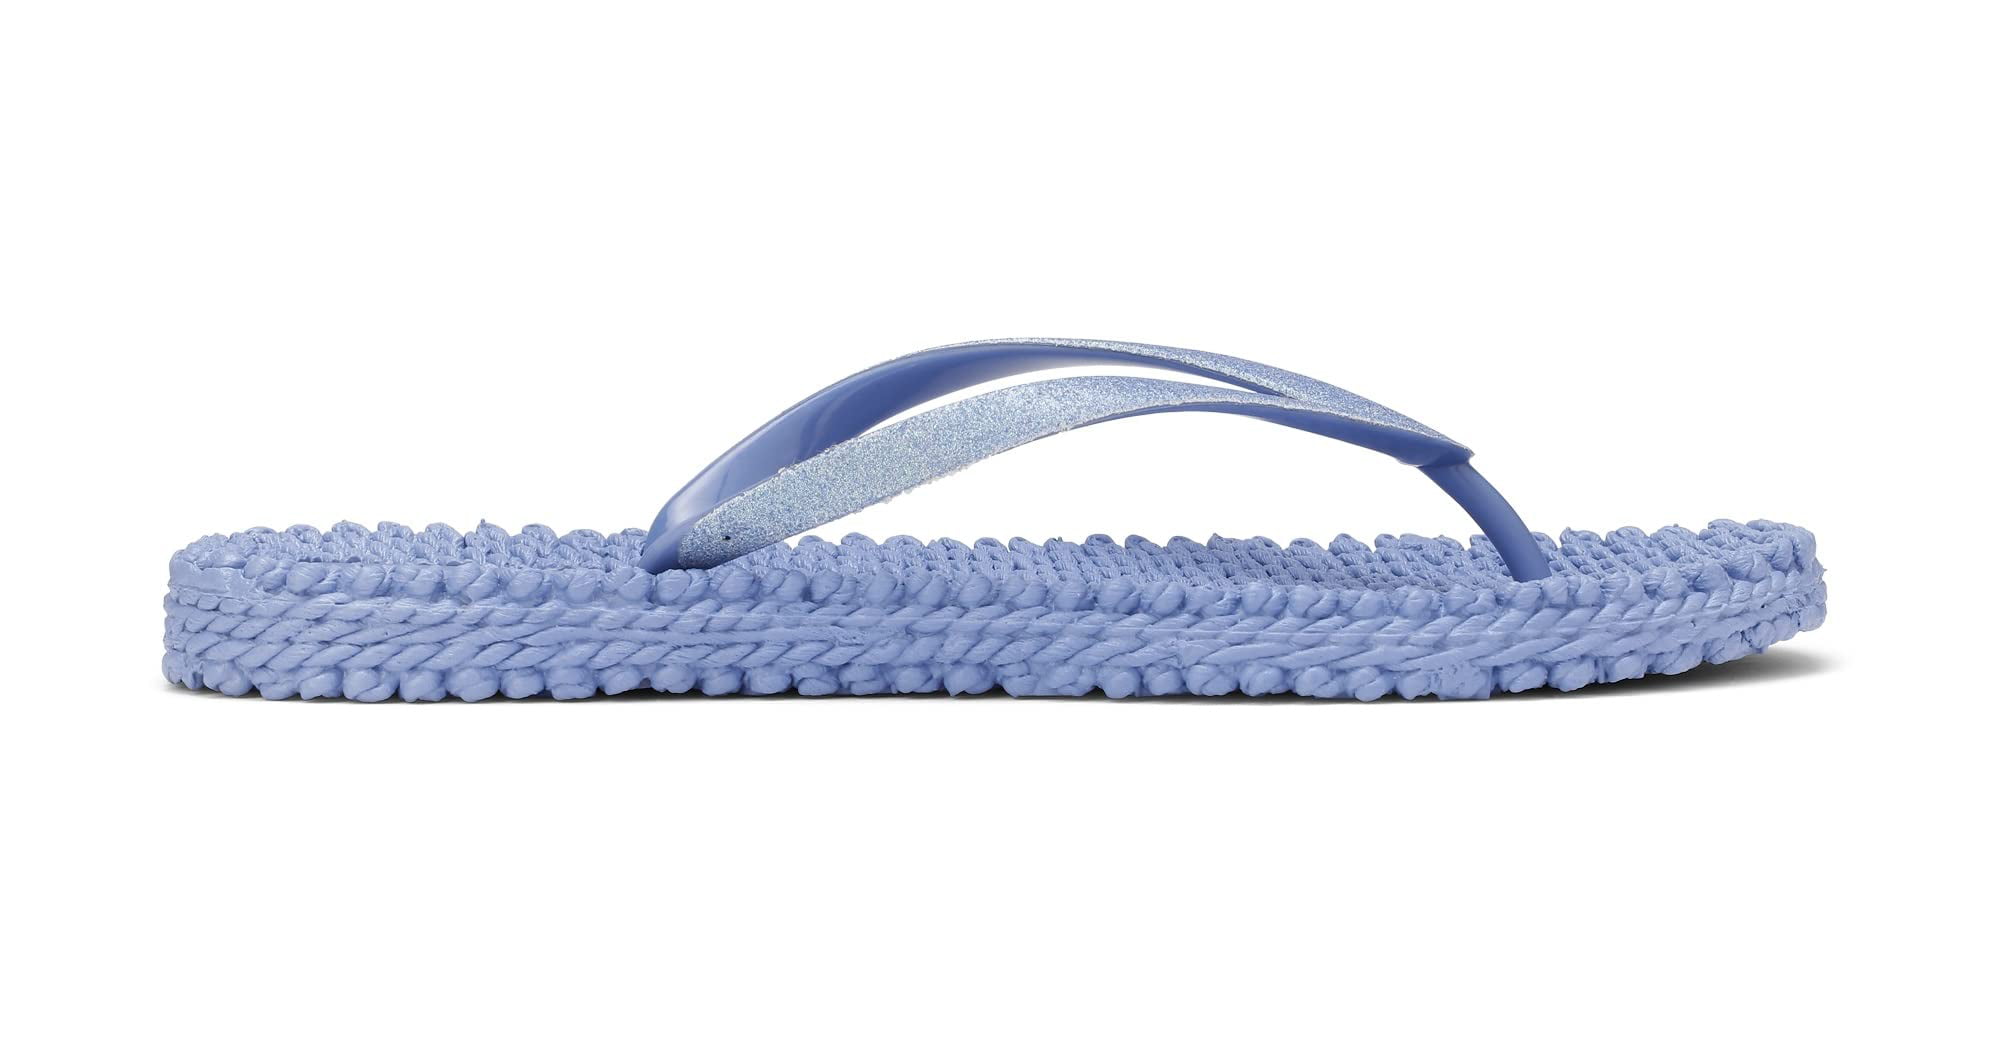 JACOBSEN Flip Flops With Glitter, Color: Atmosphere, Size: 41 (10CHEERFUL01-149-41) - Walmart.com